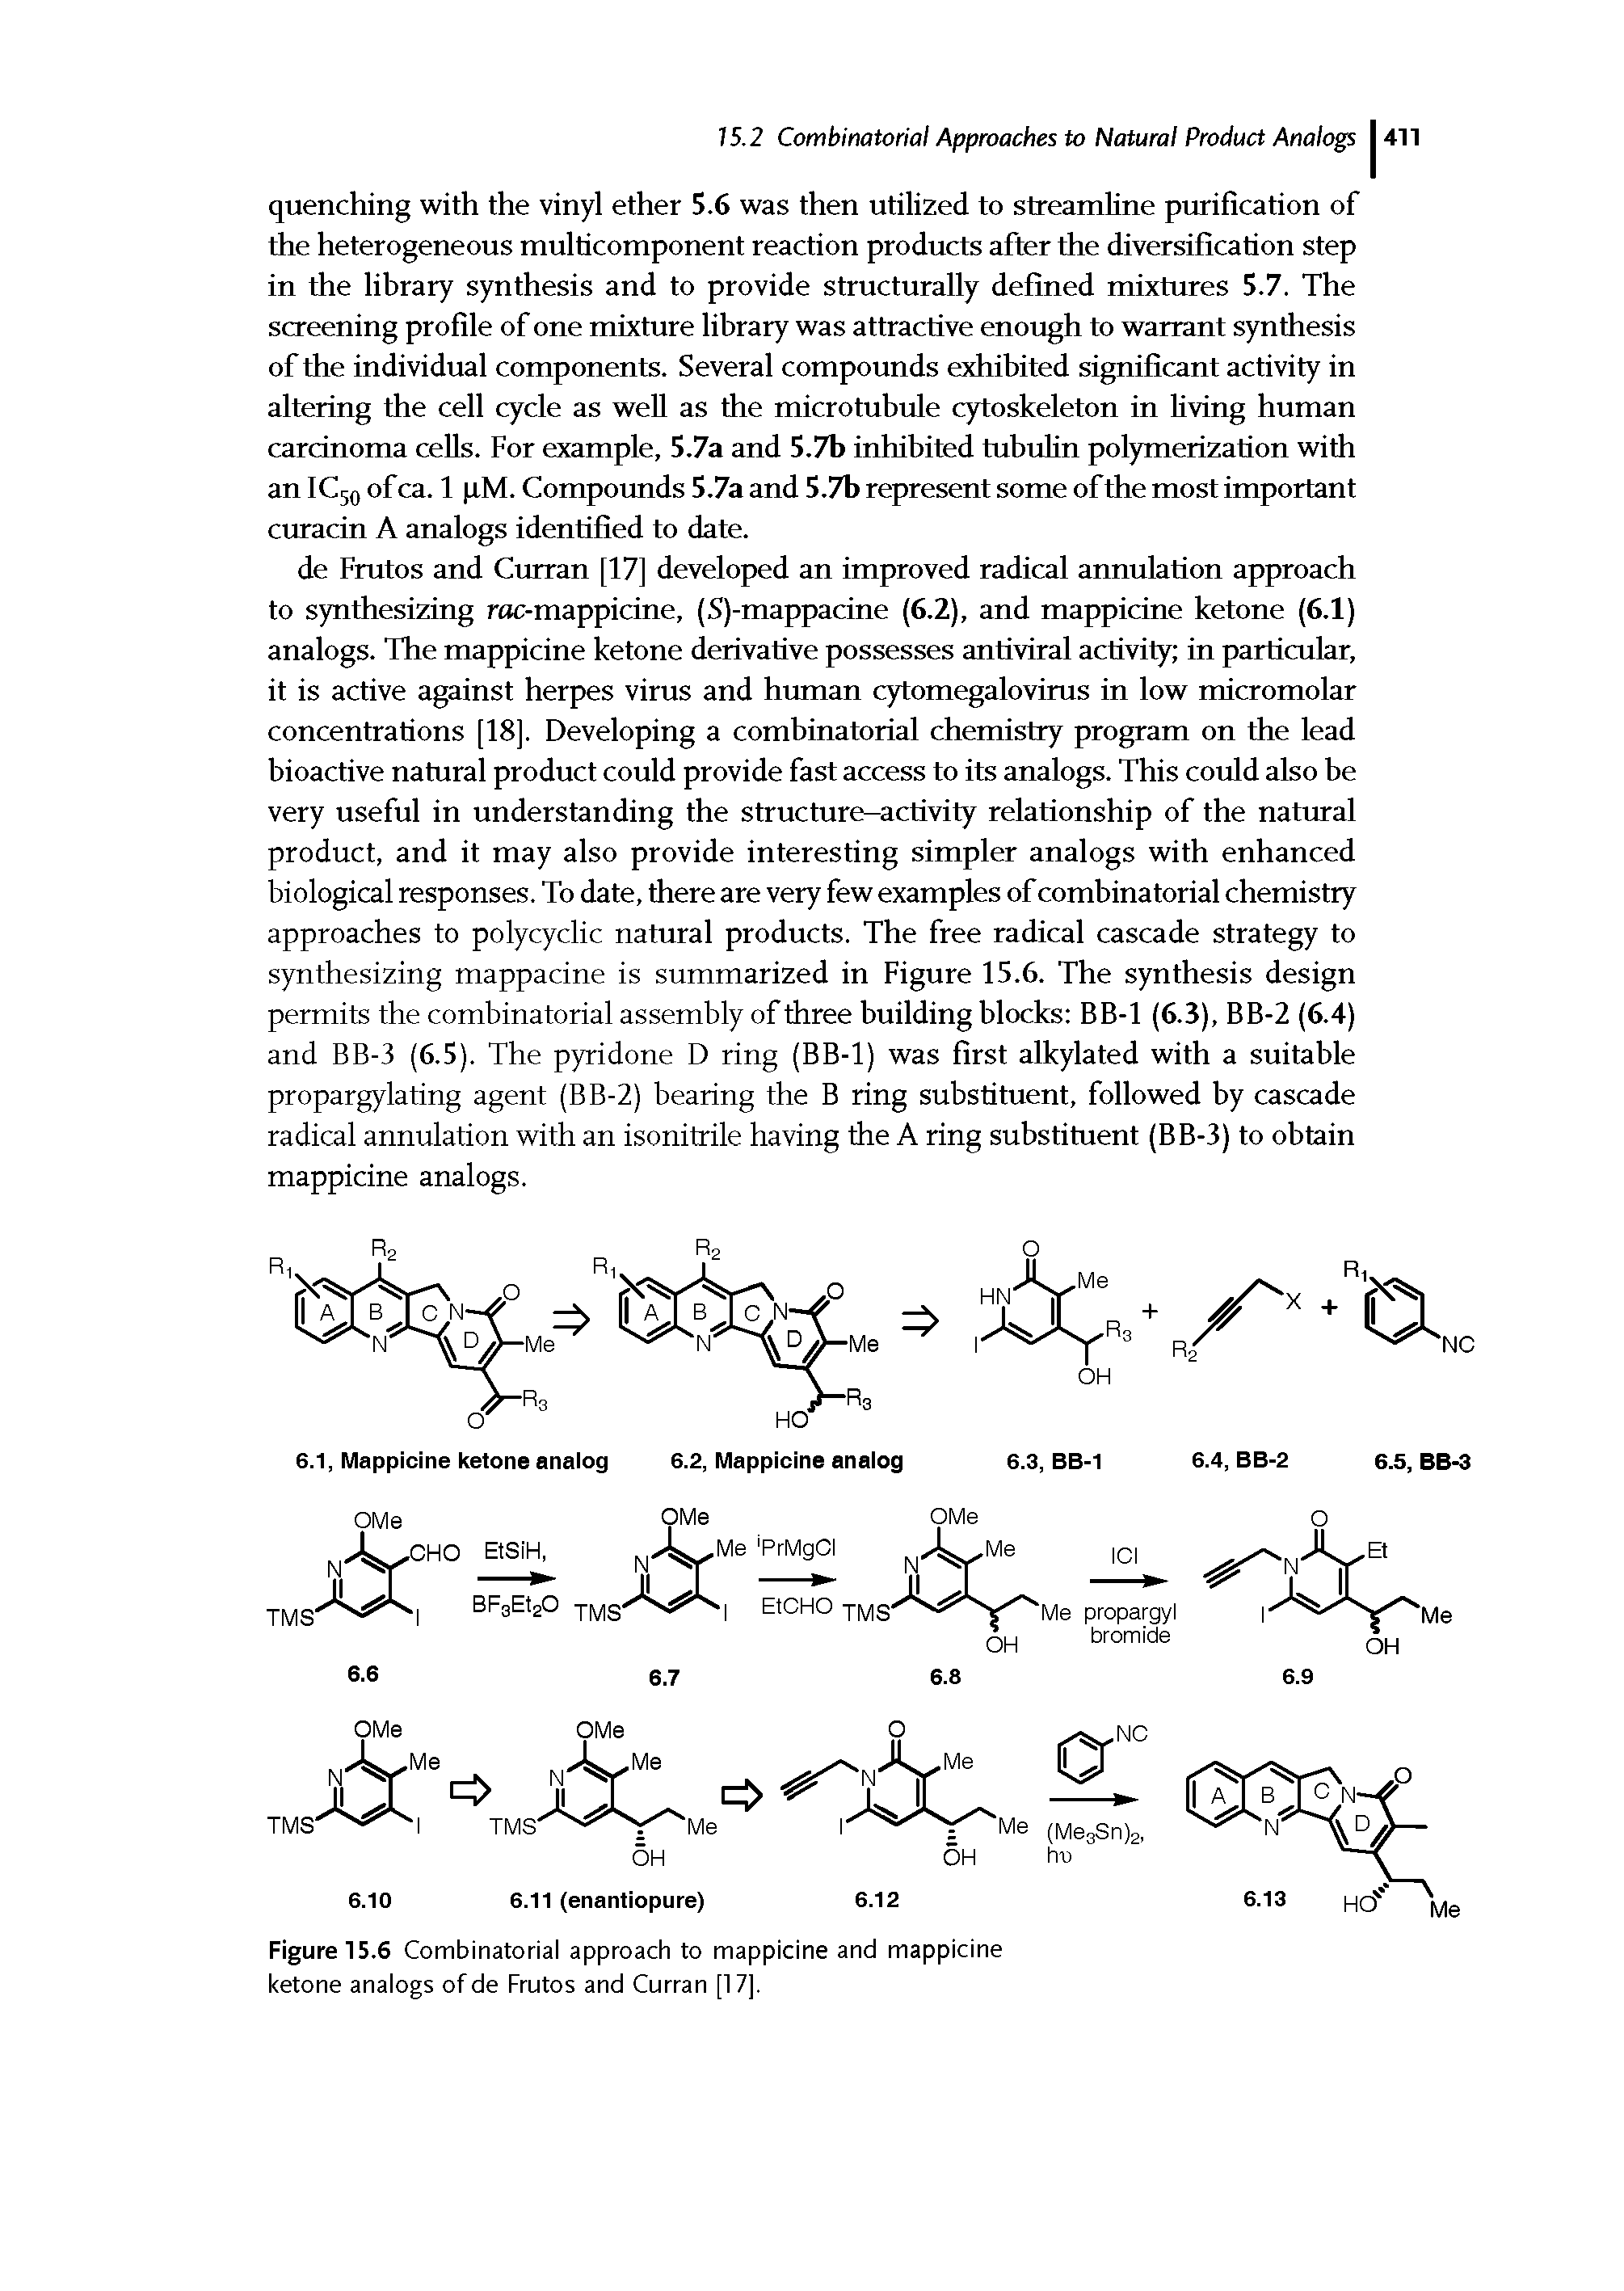 Figure 15.6 Combinatorial approach to mappicine and mappicine ketone analogs of de Frutos and Curran [17].